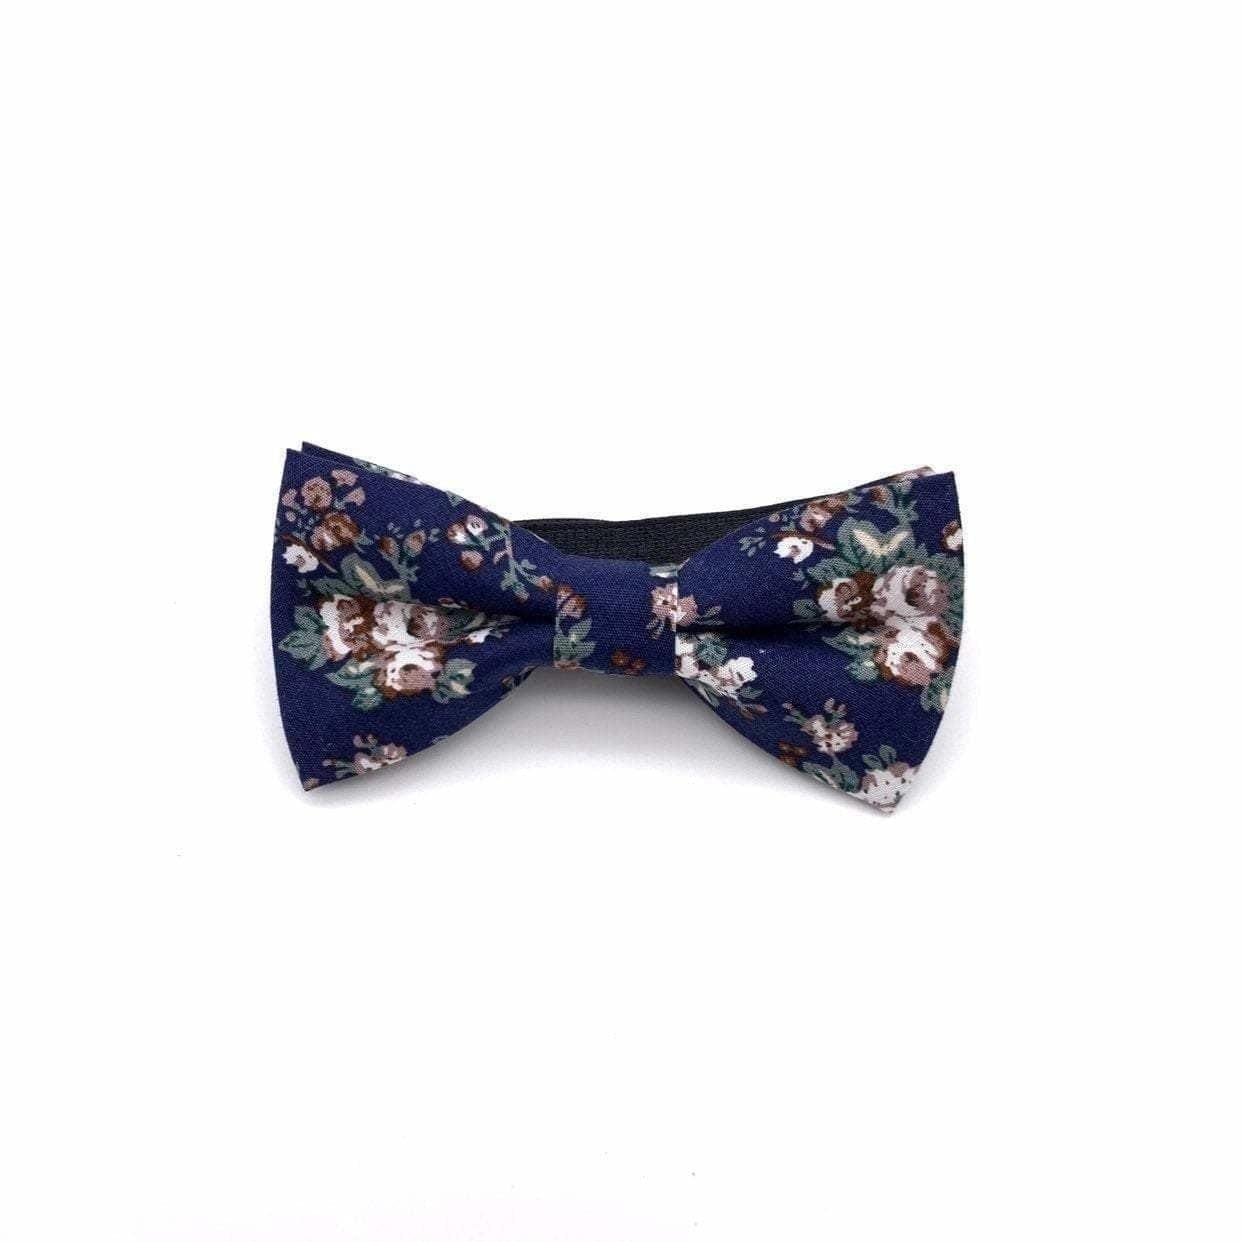 Kids Floral Pre-Tied Bow Tie LAKE-Kids Floral Pre-Tied Bow Tie Your little one will be the star of the show with this LAKE Kids Floral Pre-Tied Bow Tie. In a beautiful floral design, this bow tie will have them looking their best for any occasion. Whether it&#39;s a family event, wedding or school function, they&#39;ll be sure to make a lasting impression. Mytieshop&#39;s children ties are the perfect finishing touch to any outfit. Strap is adjustablePre-Tied bowtieBow Tie 10.5 * 6CM-Mytieshop